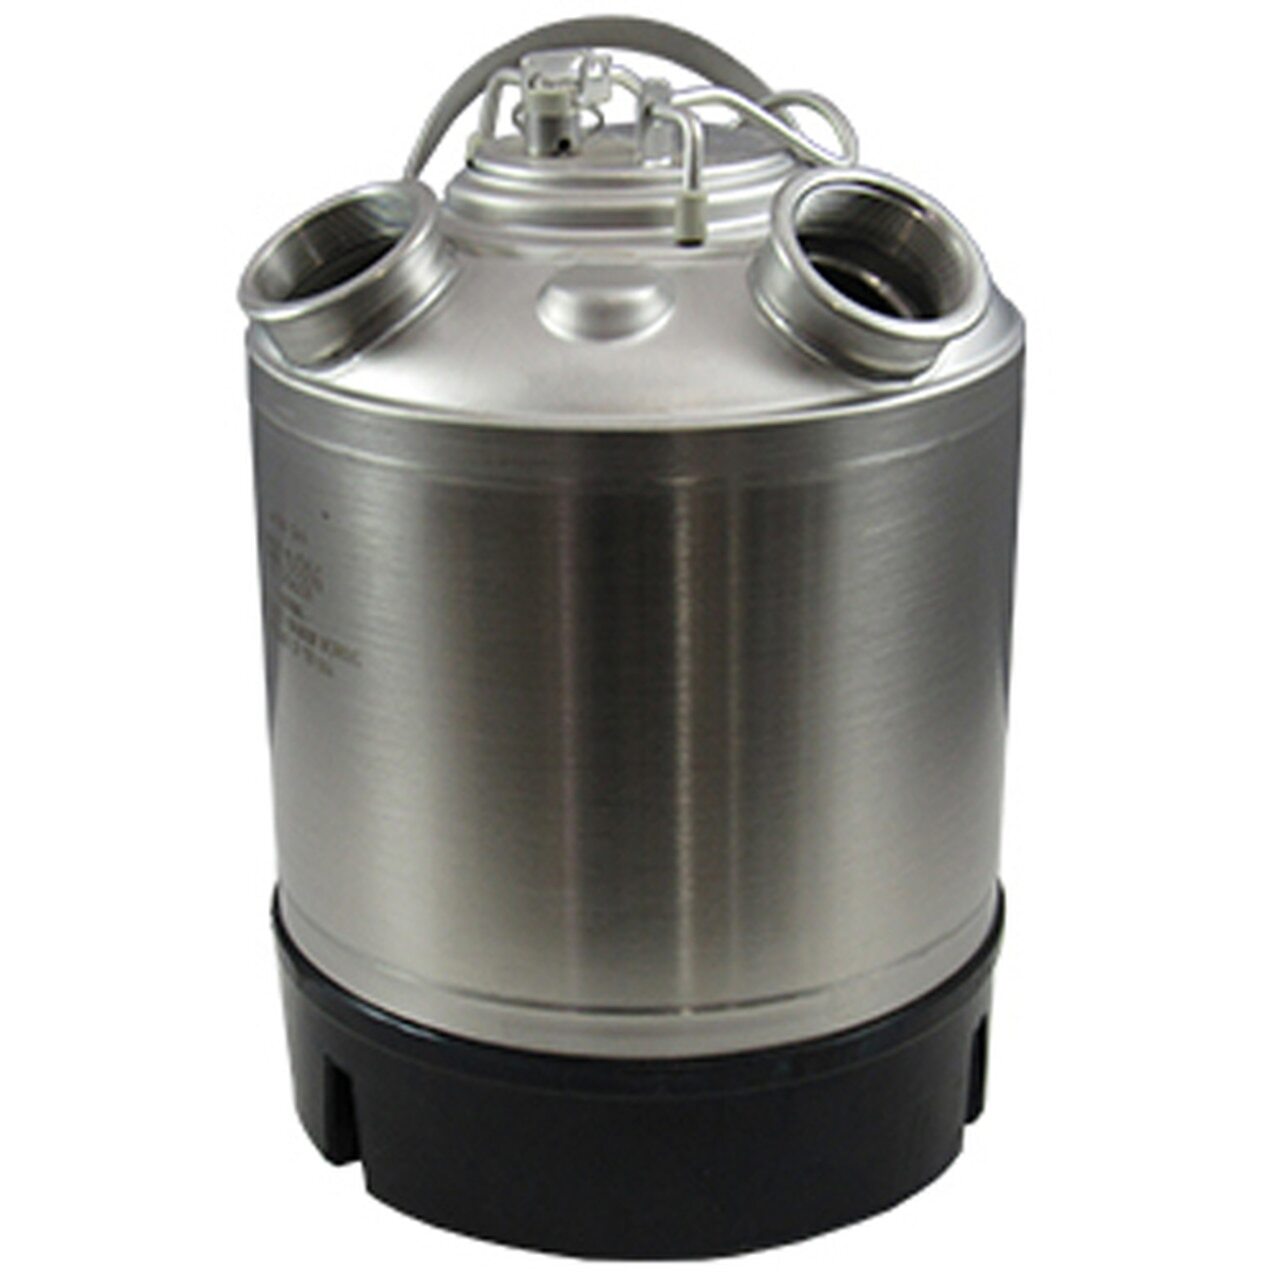 Stainless Steel Cleaning Tanks – 2.4 Gallon